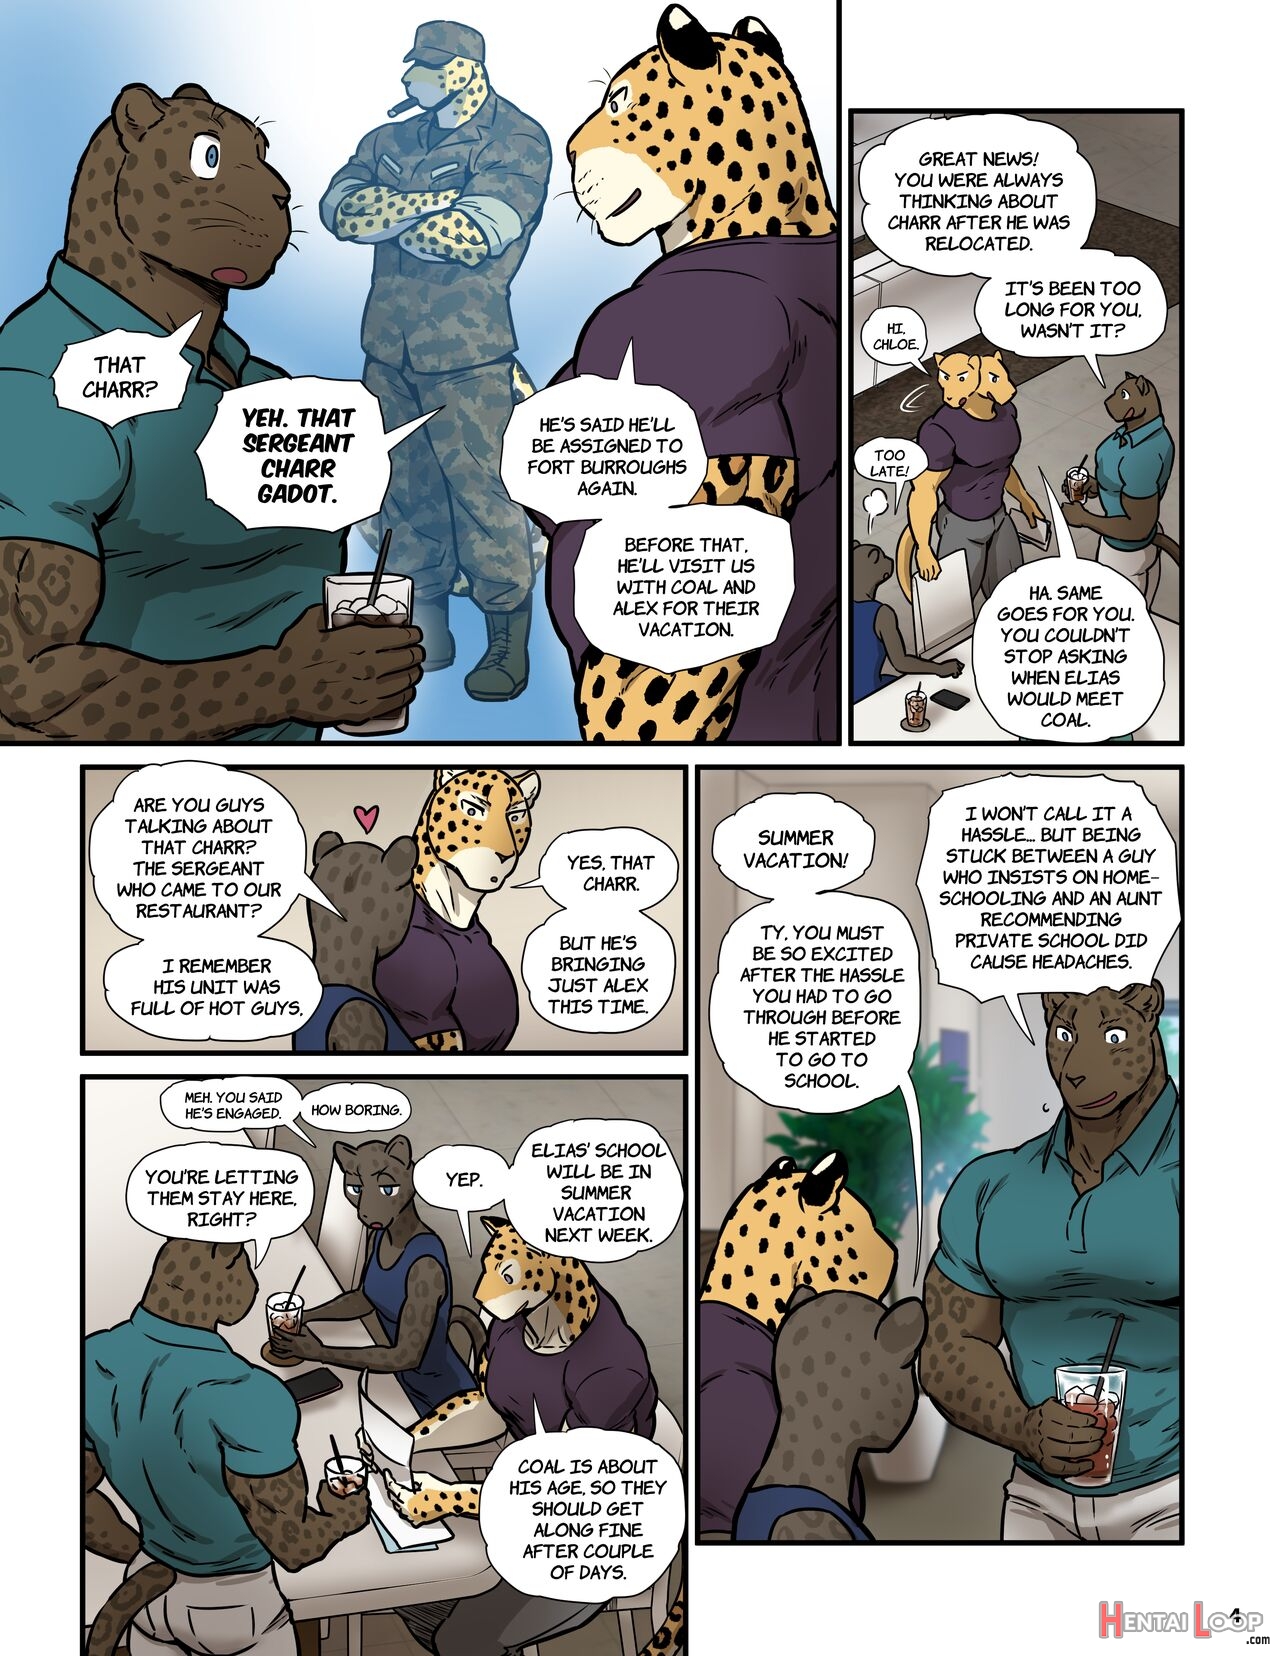 Finding Family 6 page 2